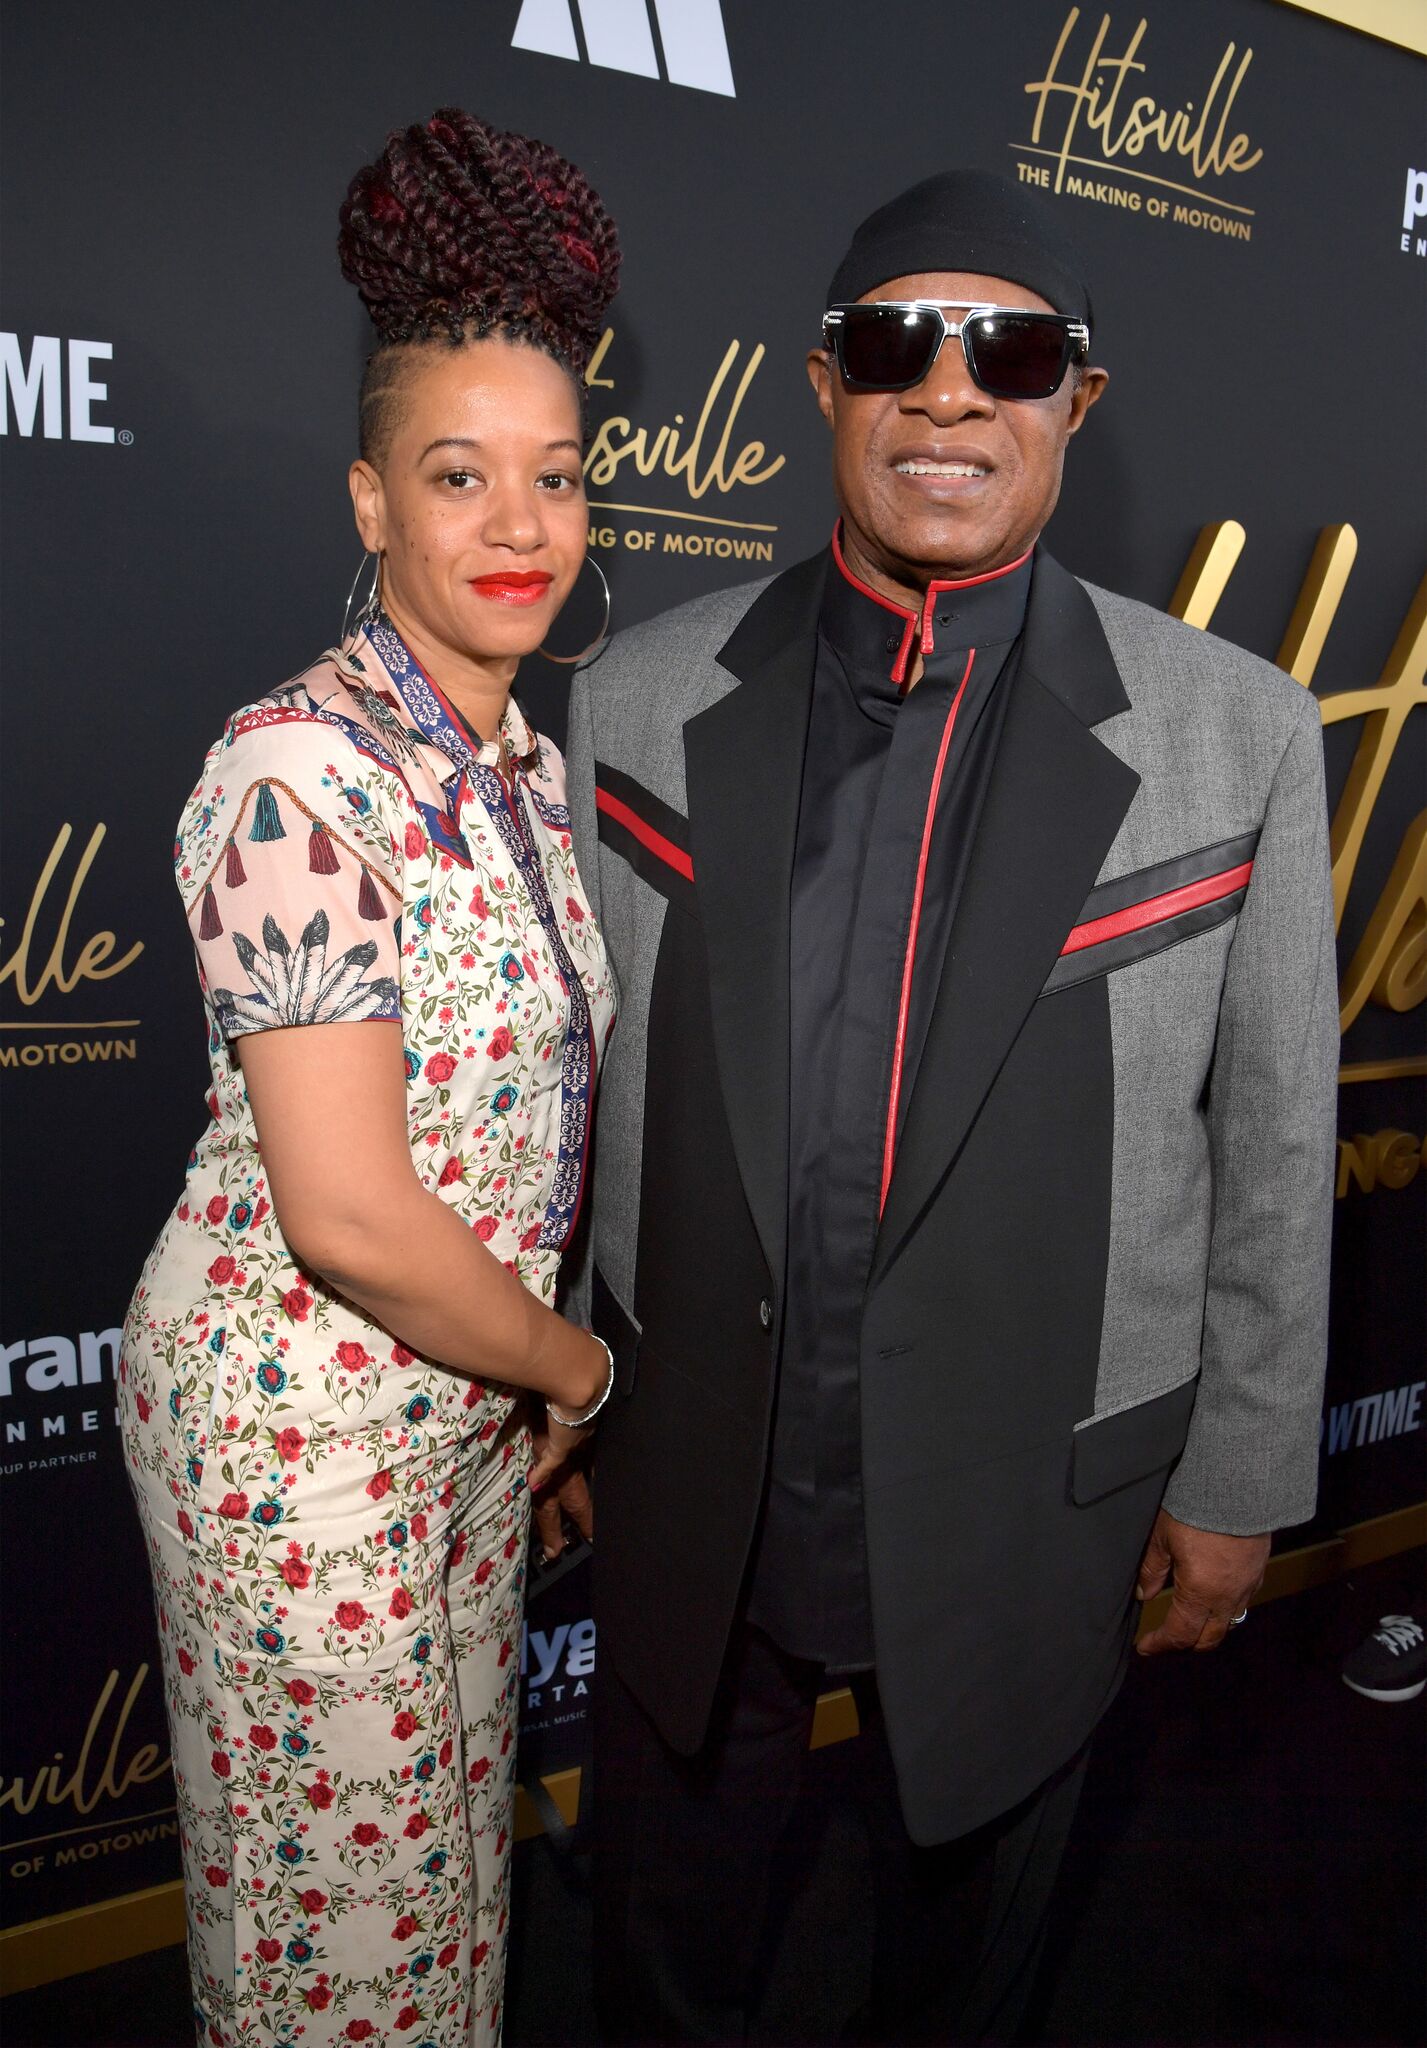 Tomeeka Robyn Bracy and Stevie Wonder attend the World Premiere and After Party of Showtime's "HITSVILLE: The MAKING OF MOTOWN" at Harmony Gold Theatre | Getty Images